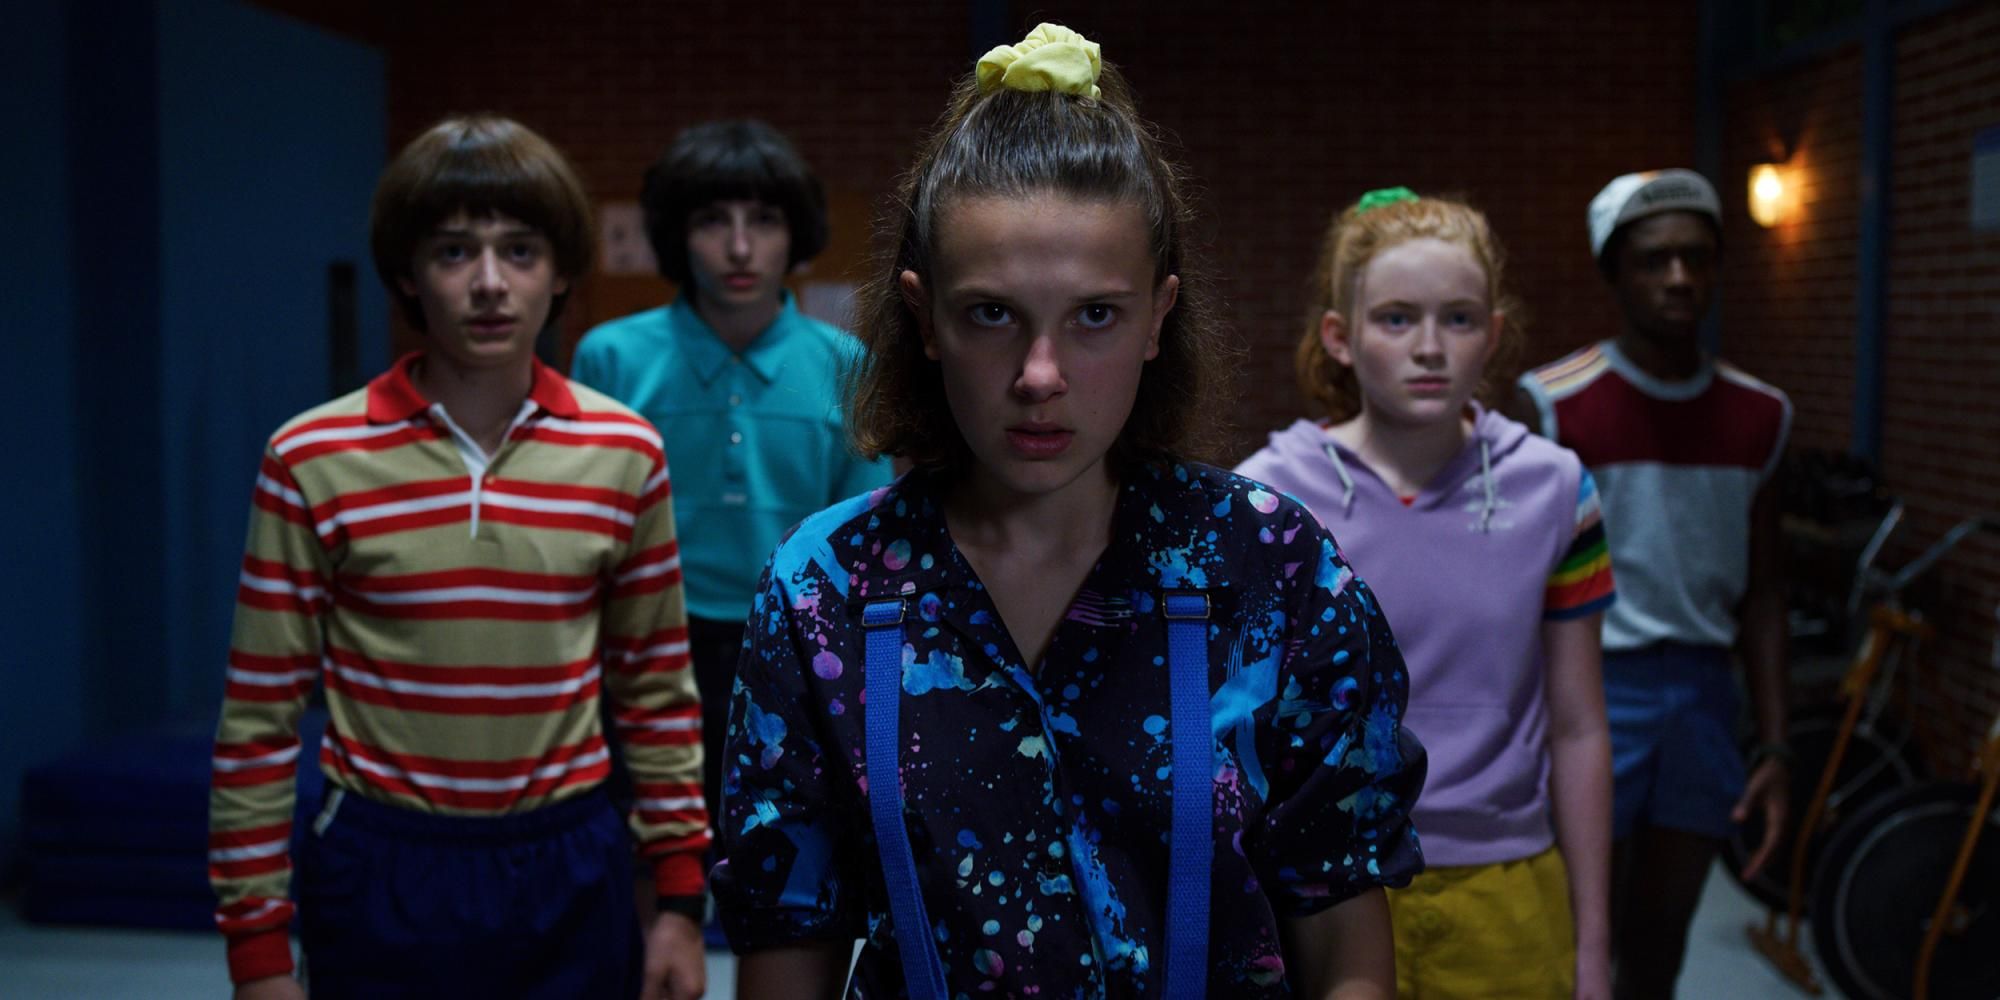 Eleven stands in front of the rest of the kids from Stranger Things 